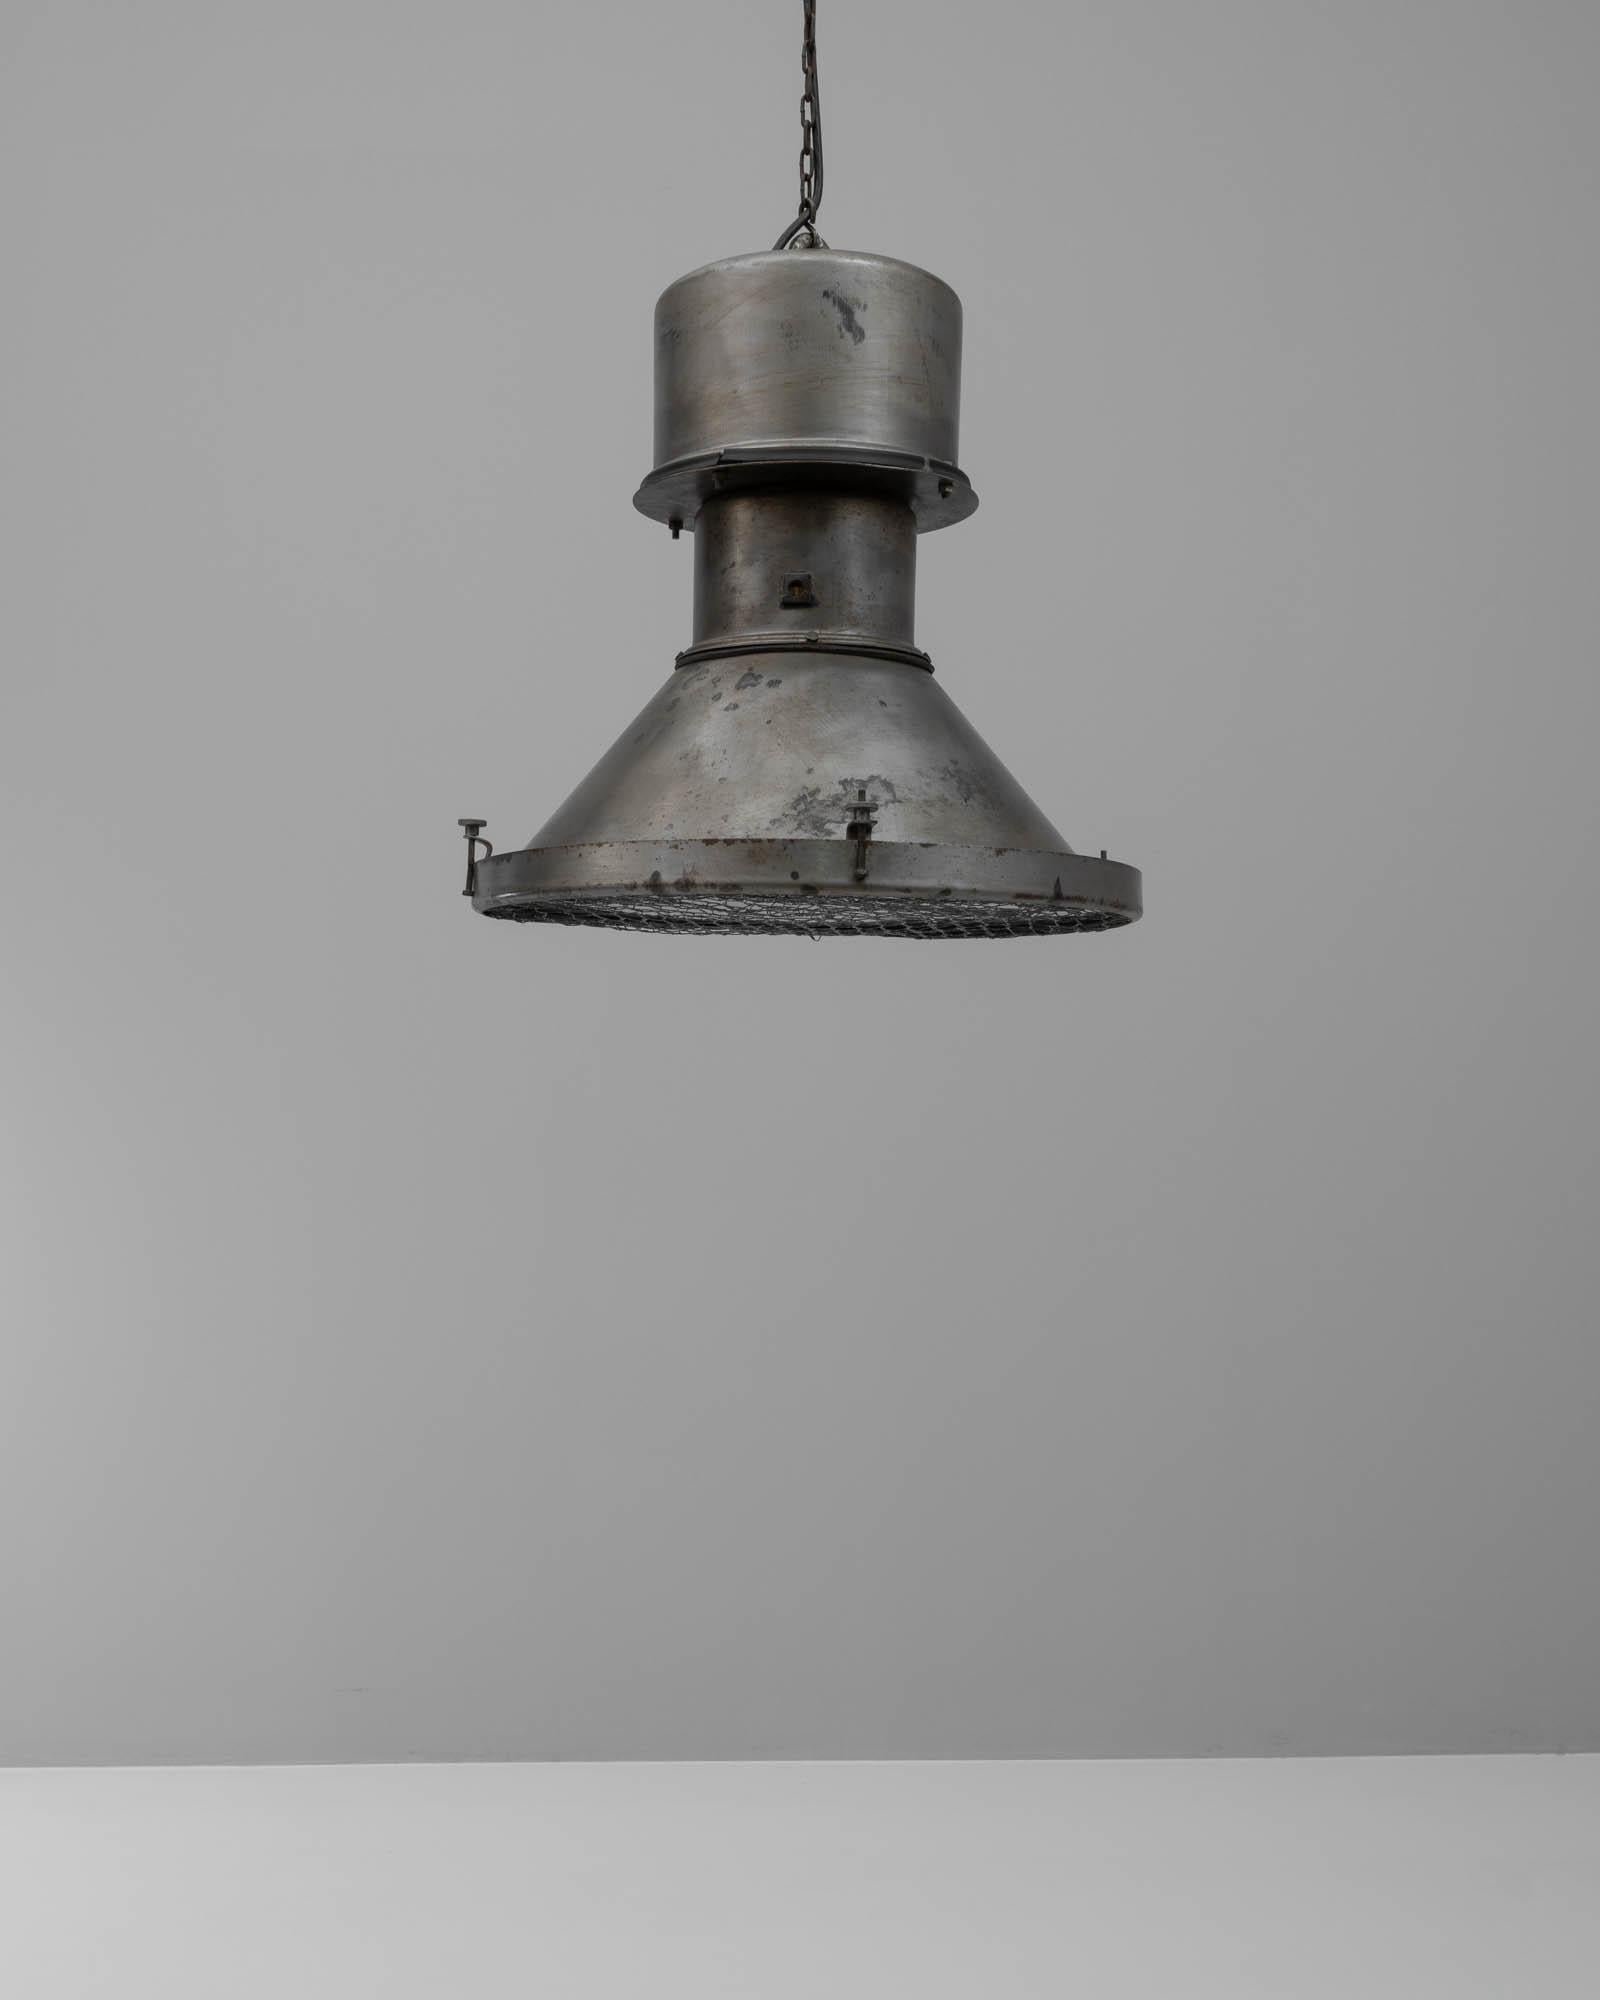 This 20th Century Polish metal pendant lamp exudes an industrial charm that's both raw and refined. The lamp's body is a sturdy metal construction, its surface showcasing the honest wear and distinctive patina of its utilitarian past. The